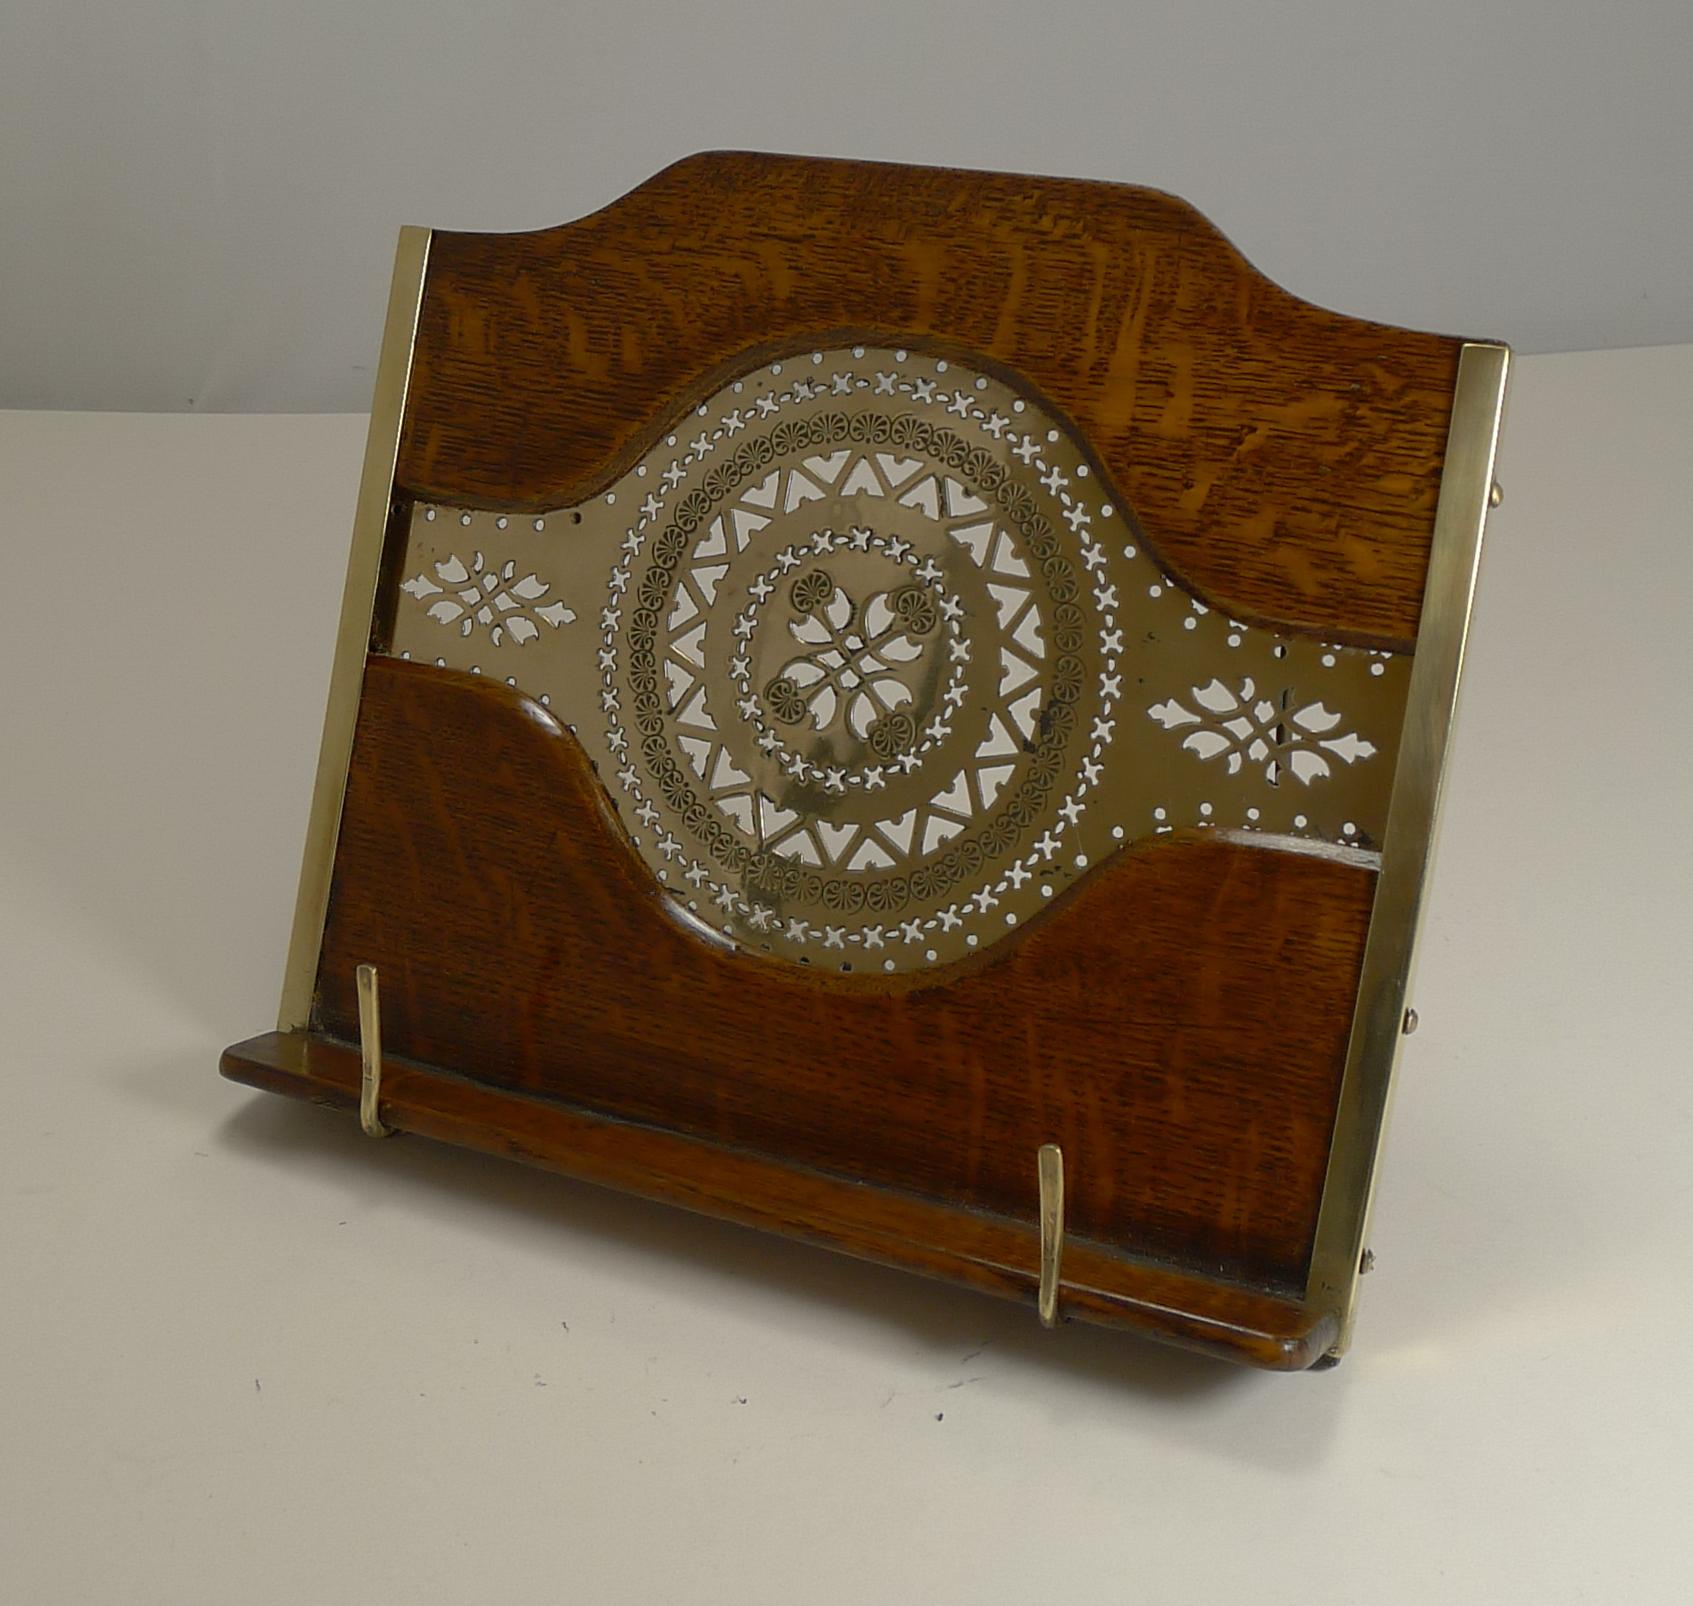 Late 19th Century Antique English Oak and Brass Lectern / Book Rest, circa 1890